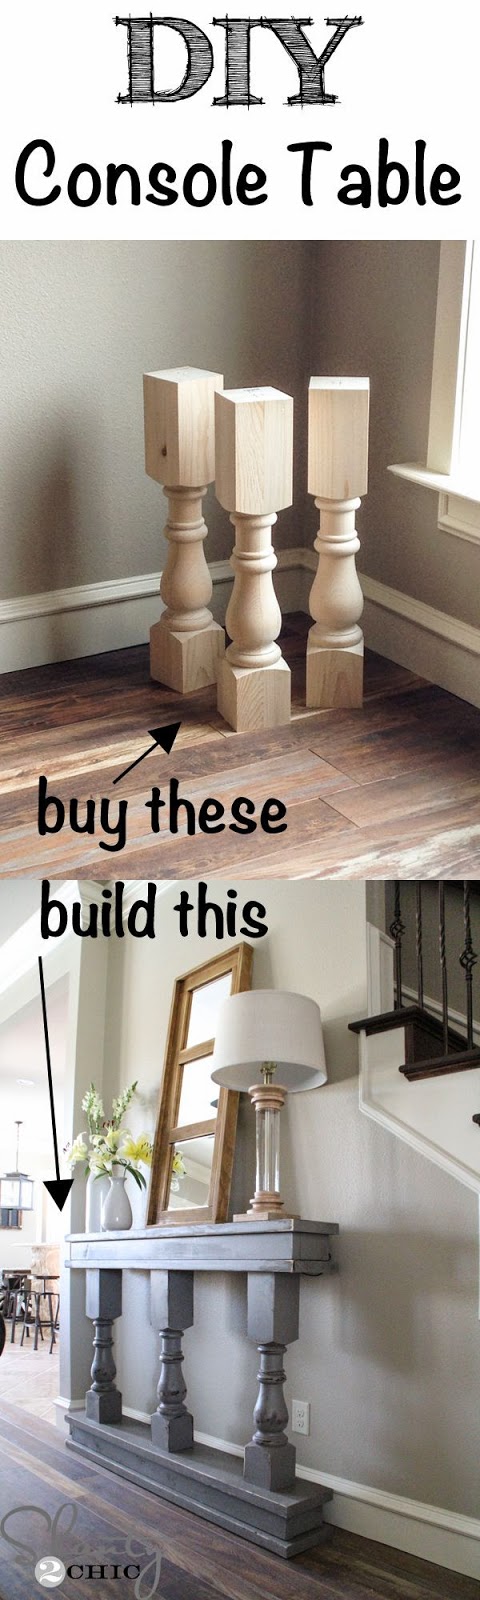 http://www.shanty-2-chic.com/2014/04/diy-console-table.html